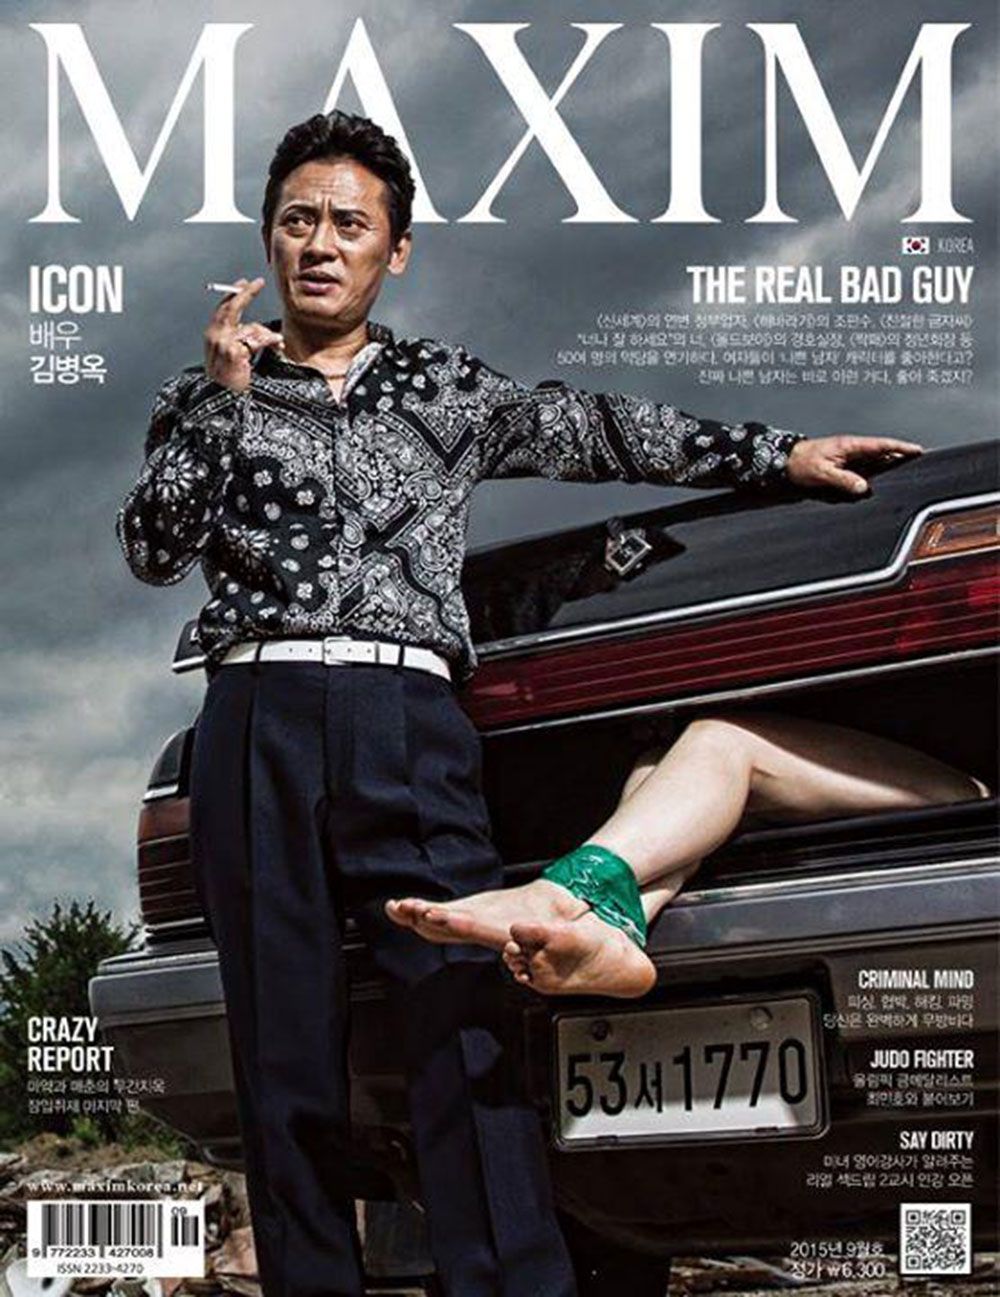 Maxim Korea features a man posing next to a woman tied up in a car boot